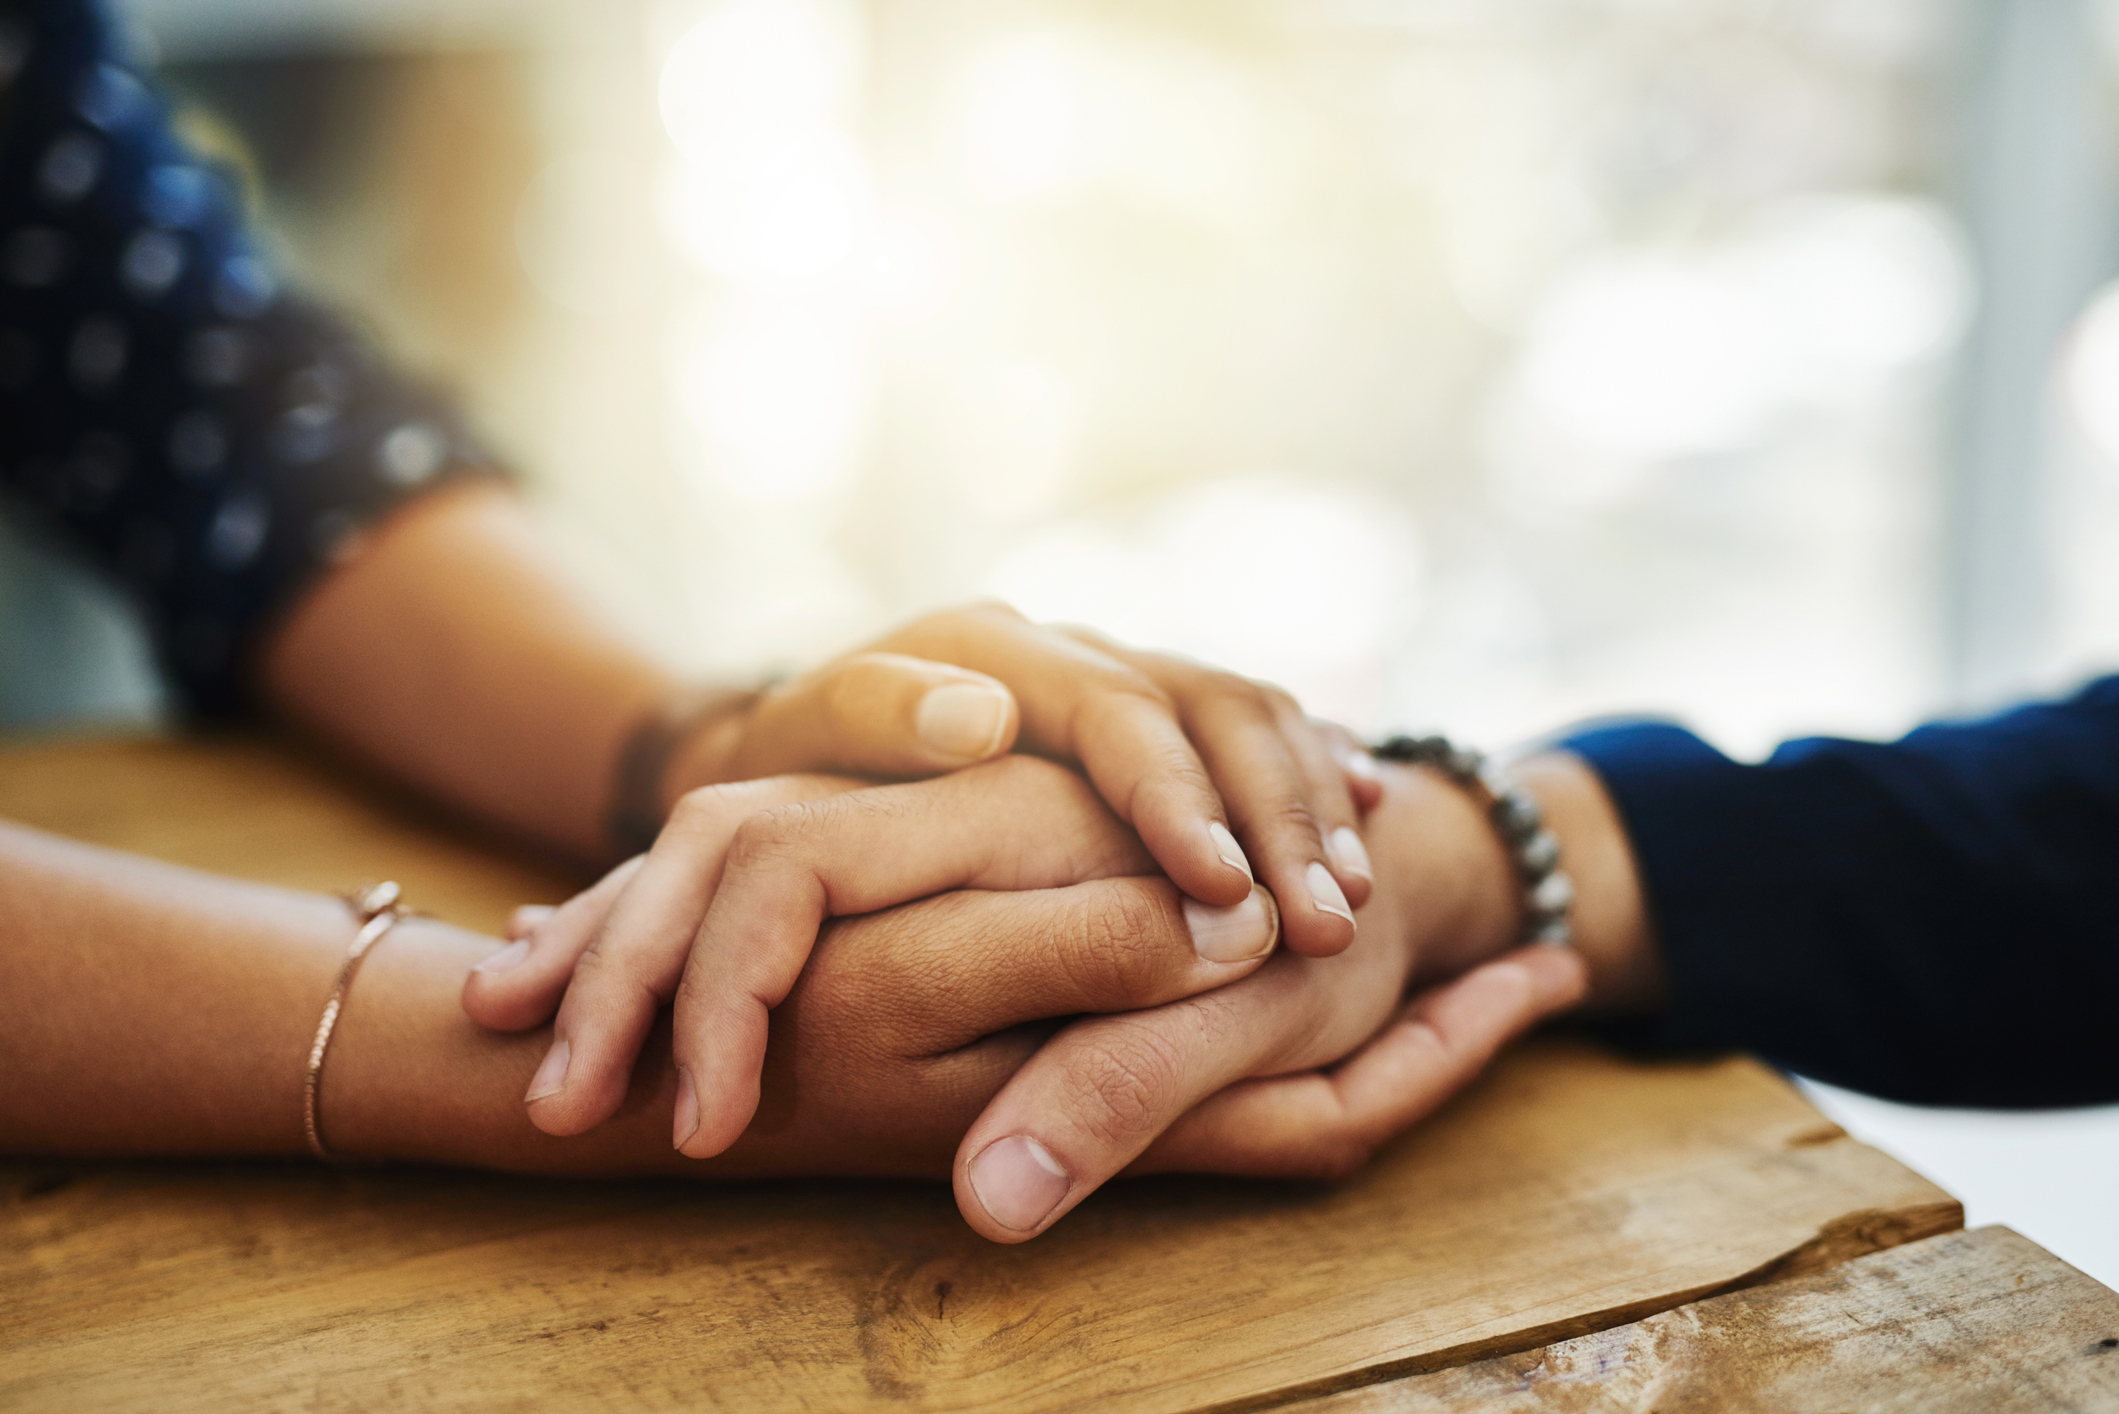 Closeup shot of two people holding hands in comfort